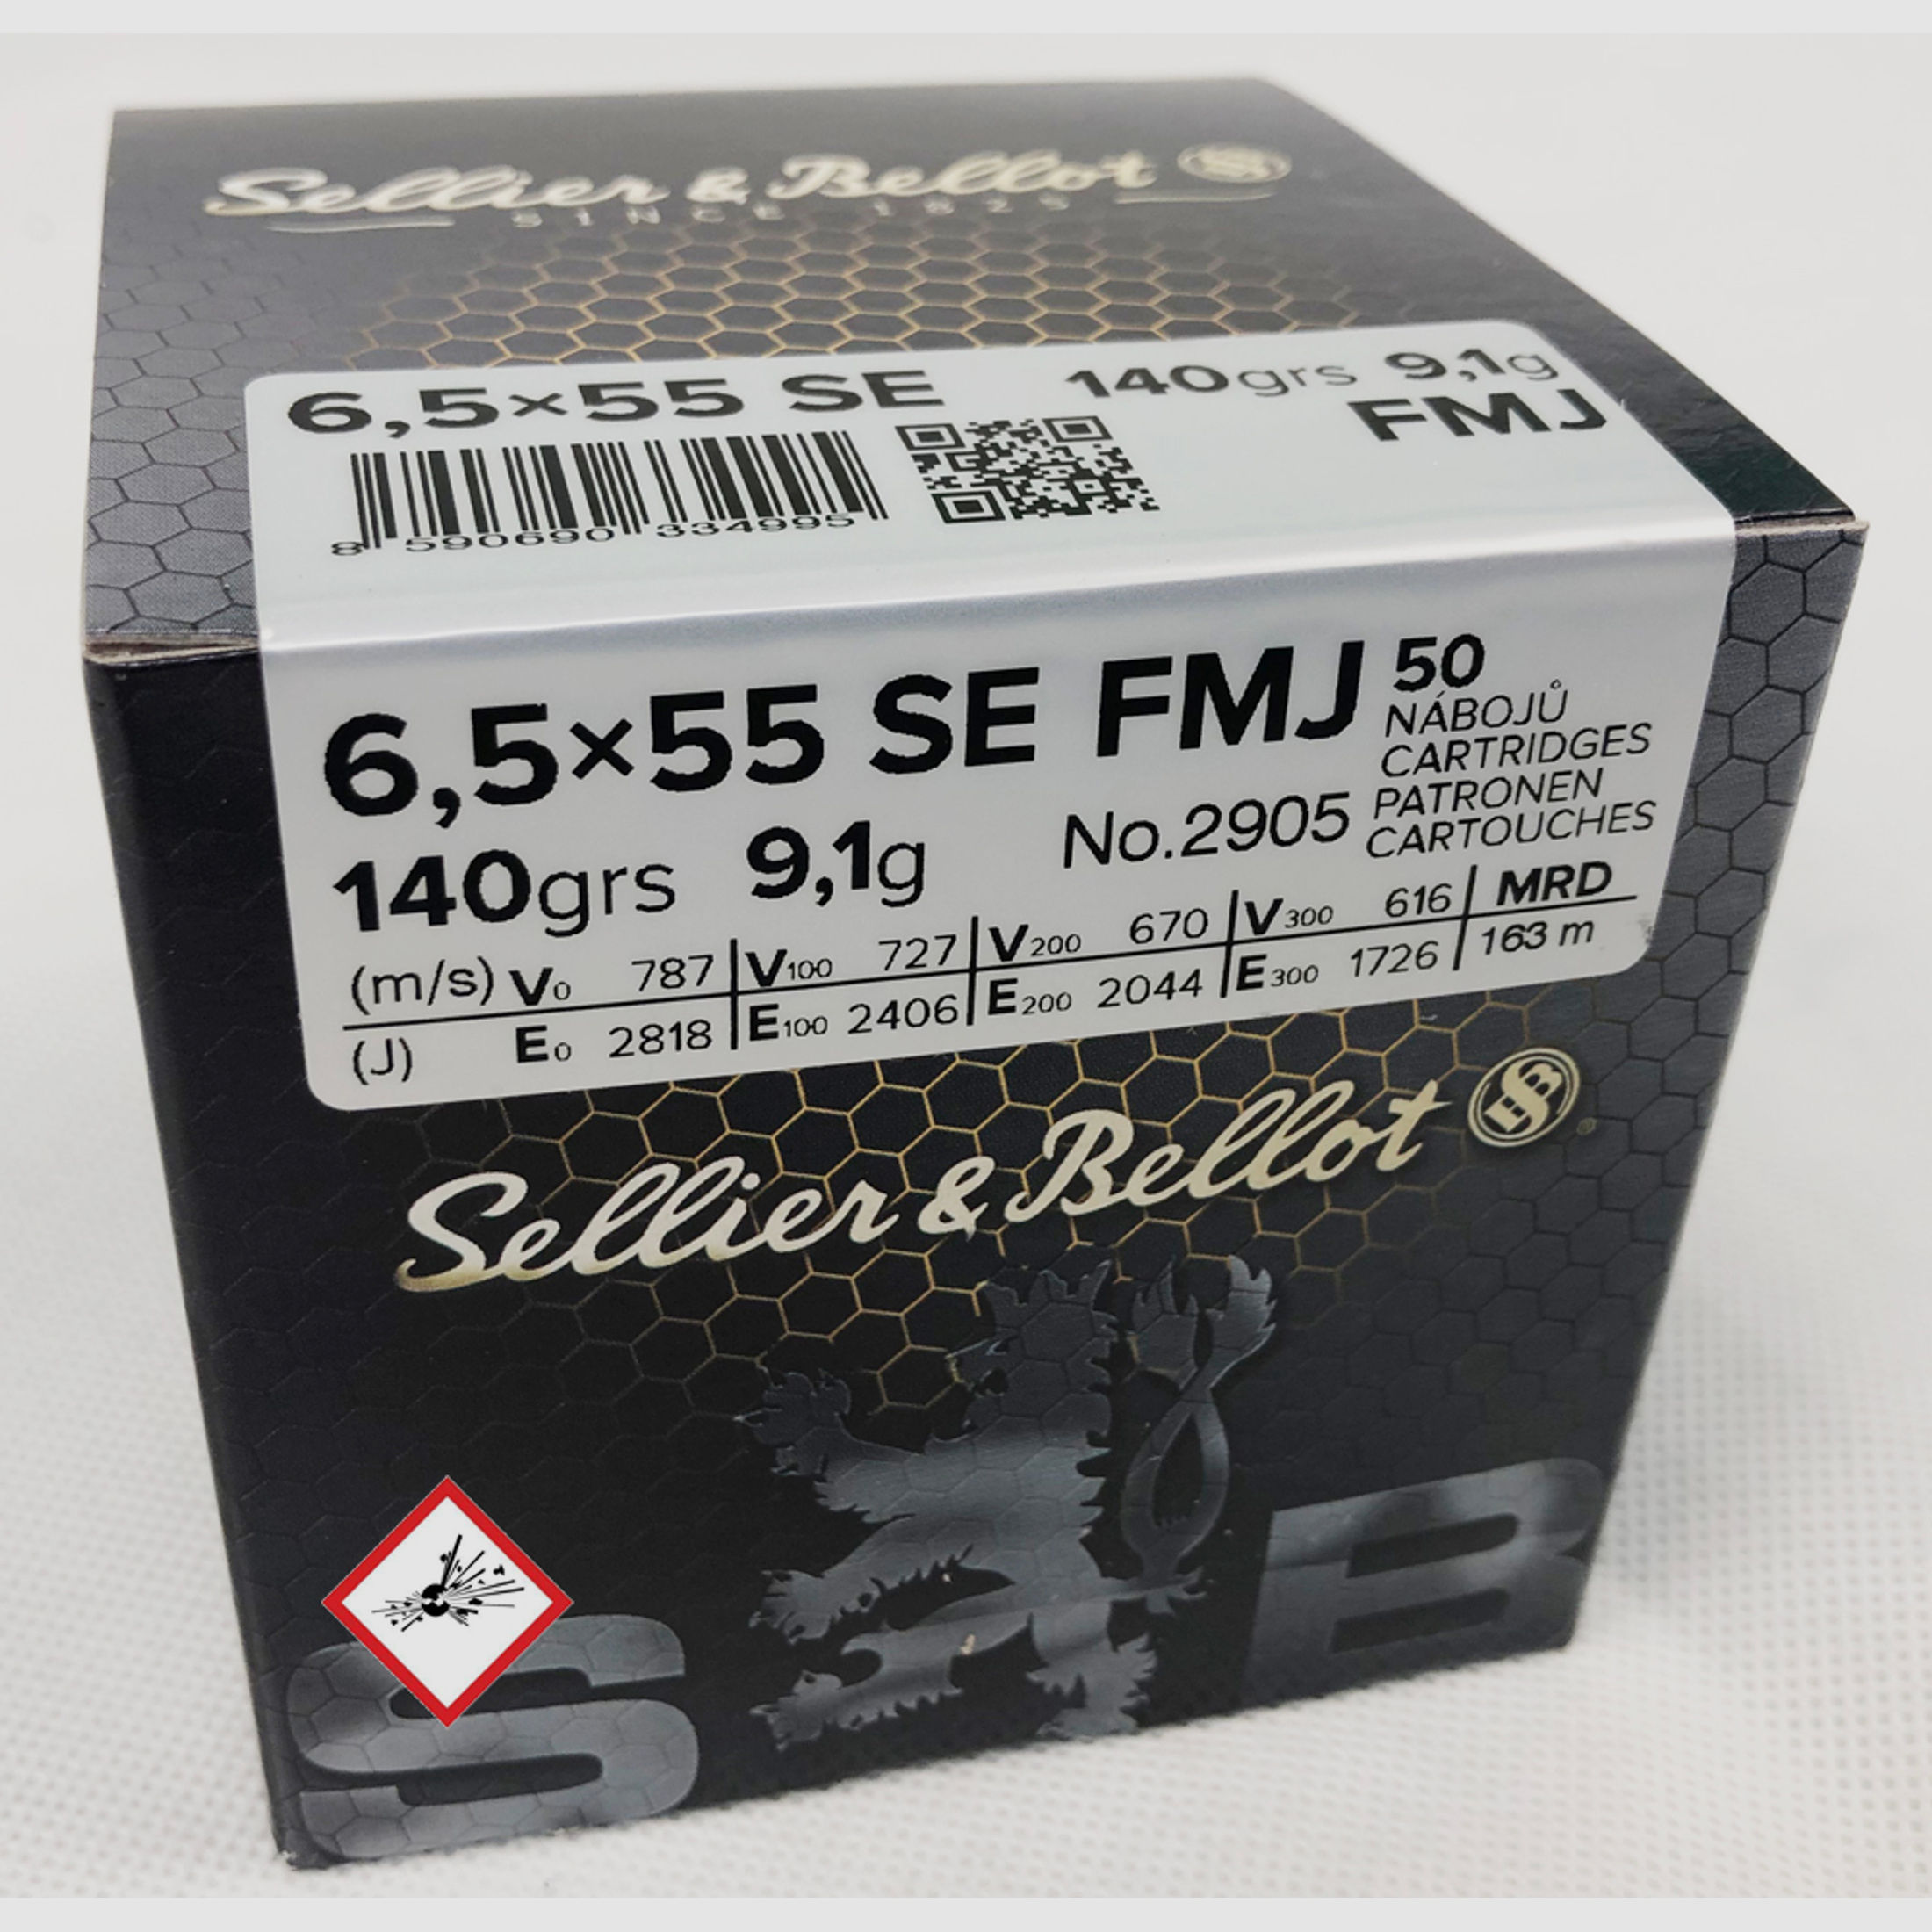 Sellier & Bellot 6,5x55 FMJ 140grs.